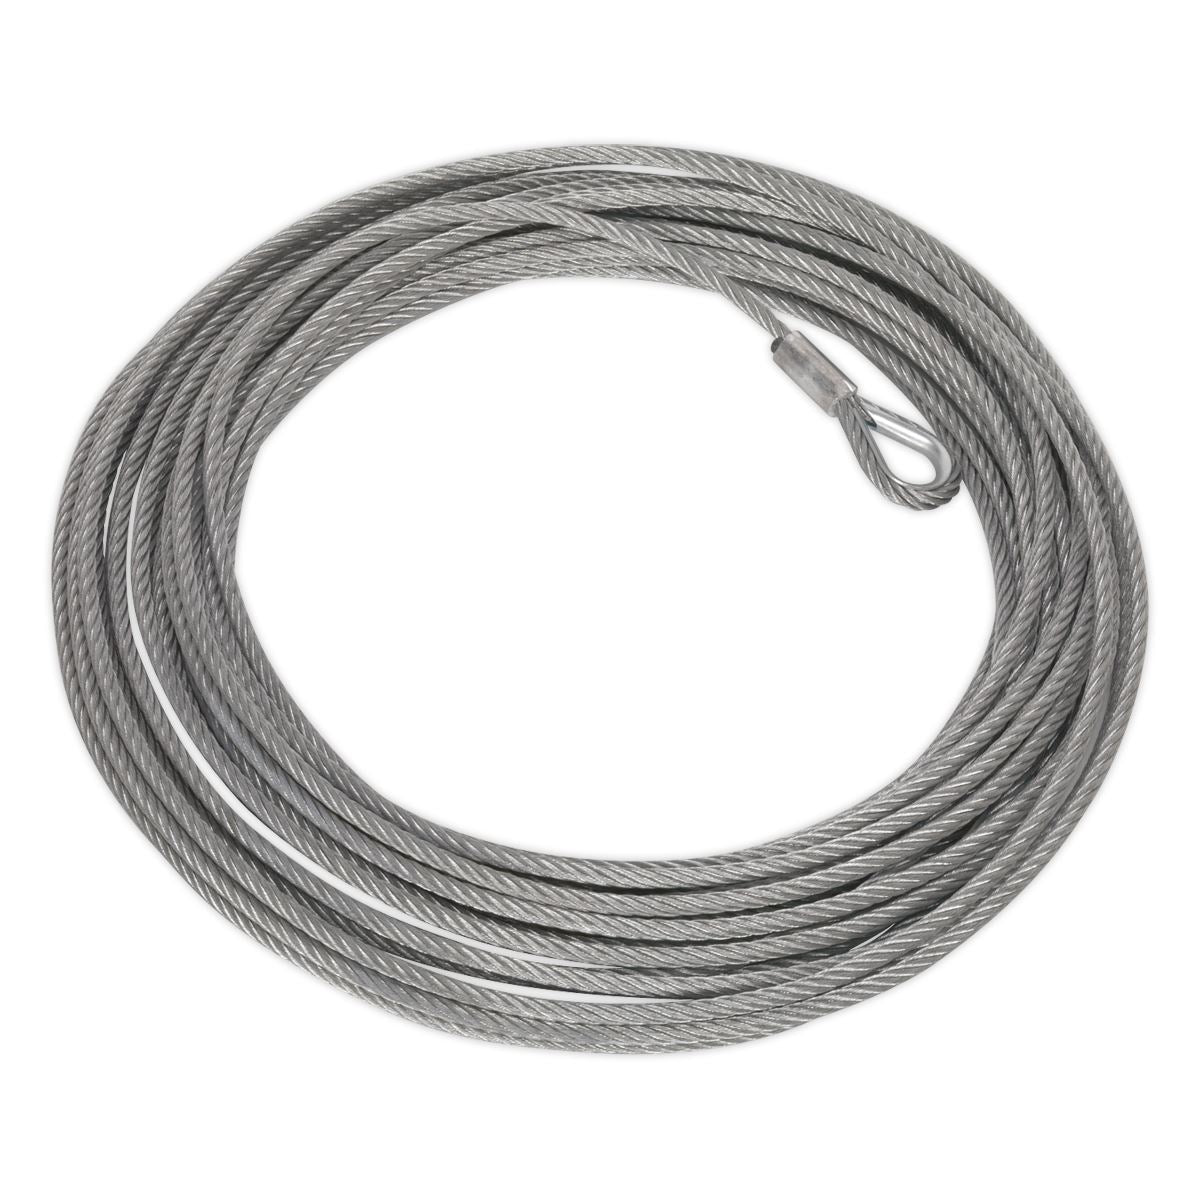 Sealey Wire Rope (Ø9.2mm x 26m) for SWR4300 & SRW5450